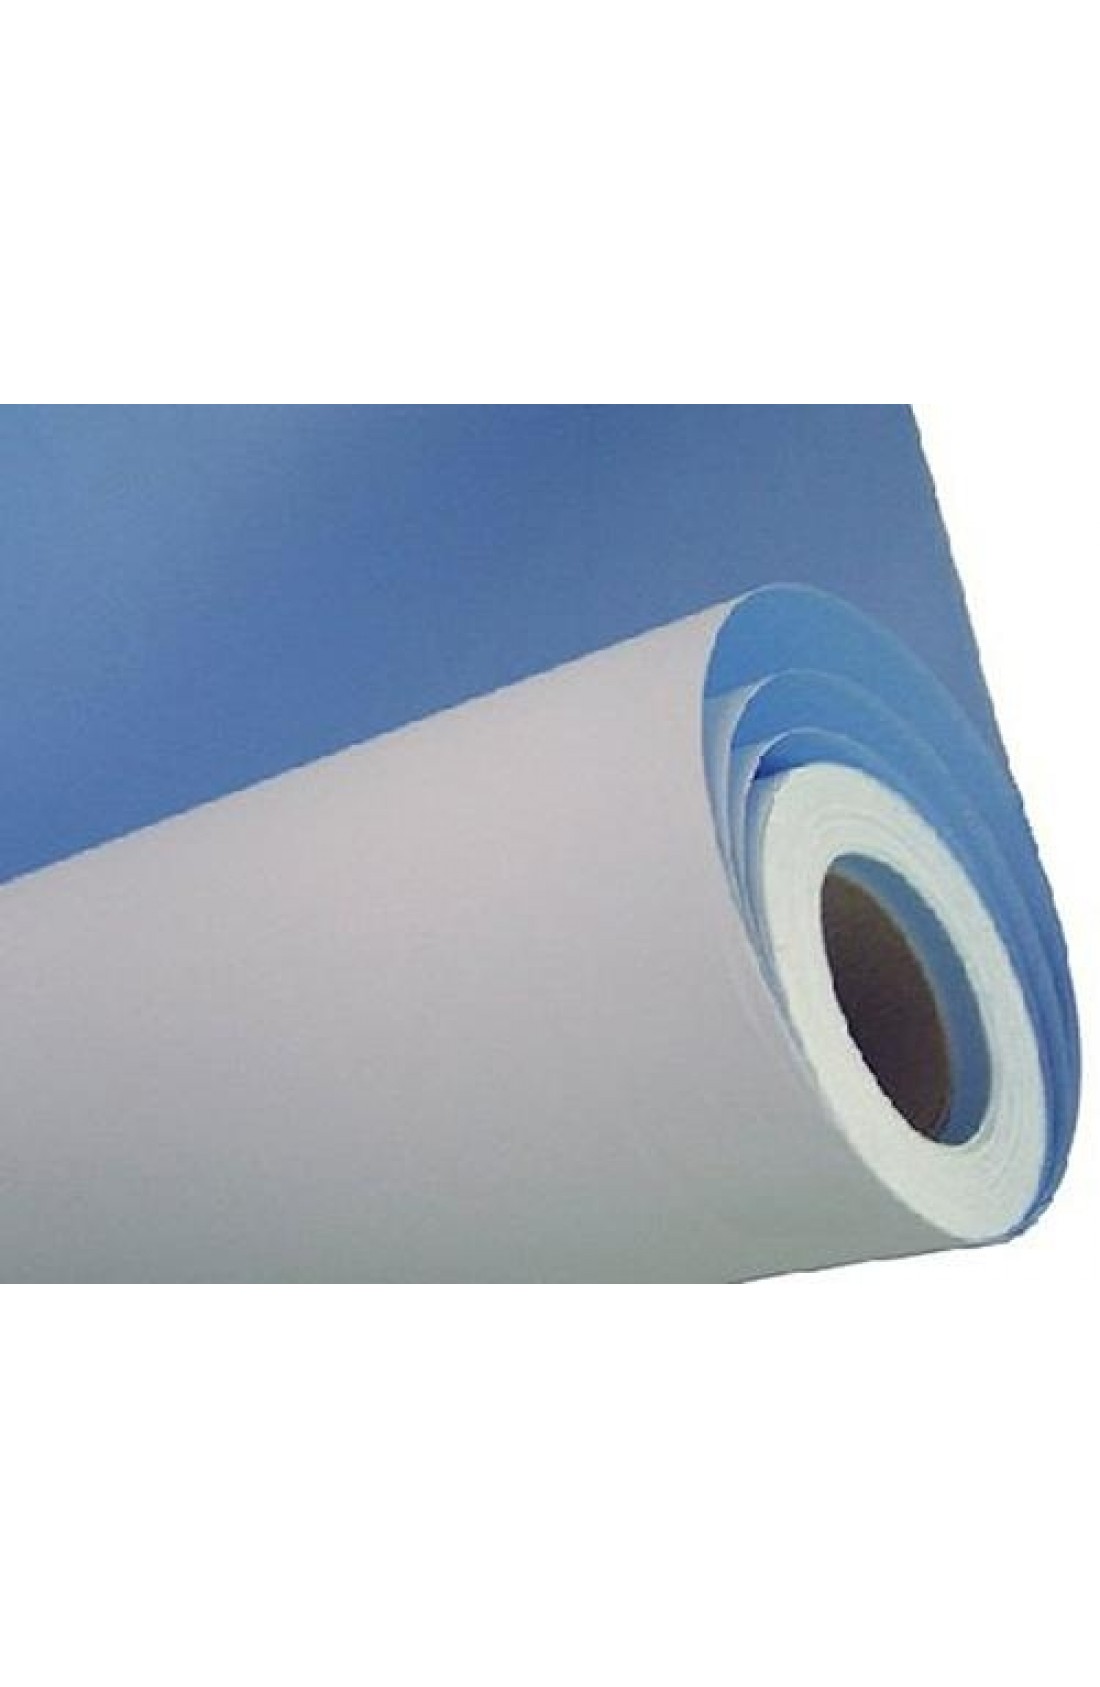 BLUEBACK PAPER "COATED HIGH RESOLUTION